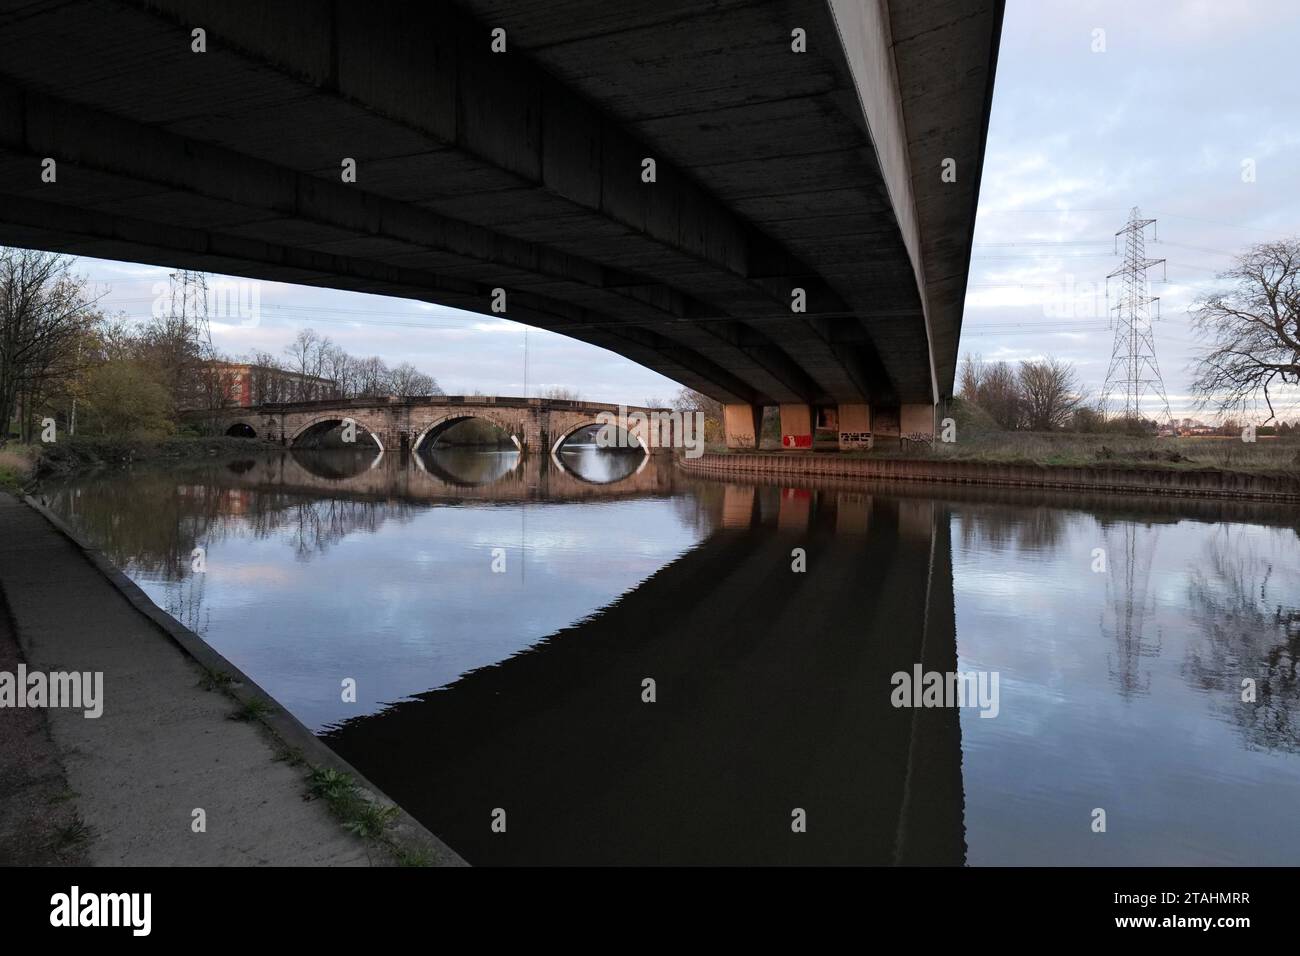 View from underneath a modern dual carriageway road, over the river Aire in UK. An old sandstone bridge can be seen in the background along with elect Stock Photo